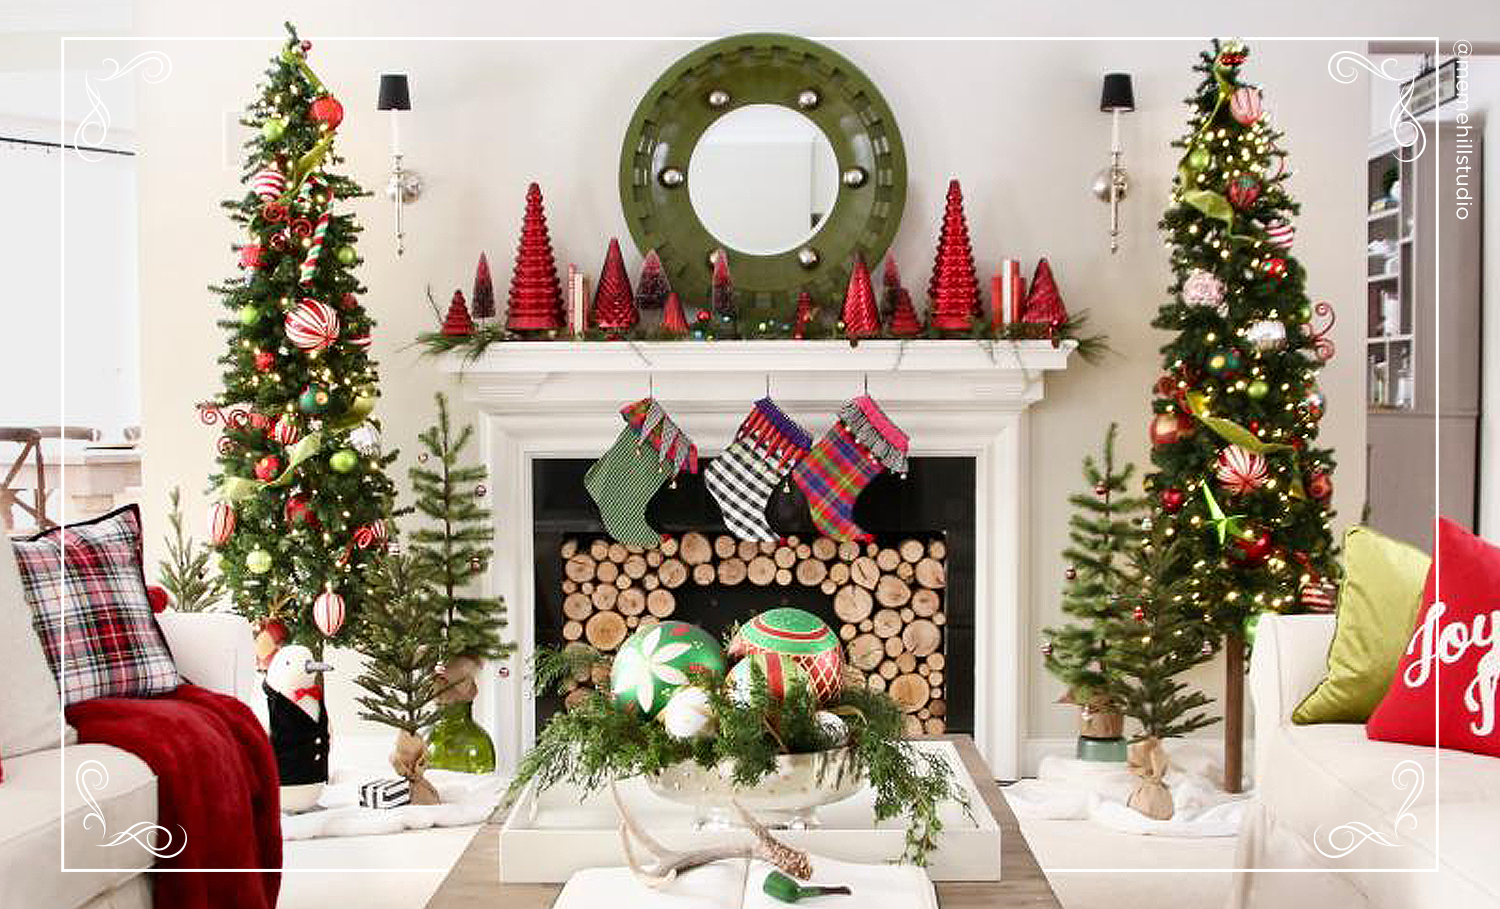 Christmas Decorating Ideas: How to Style an Insta-Worthy Home for the ...